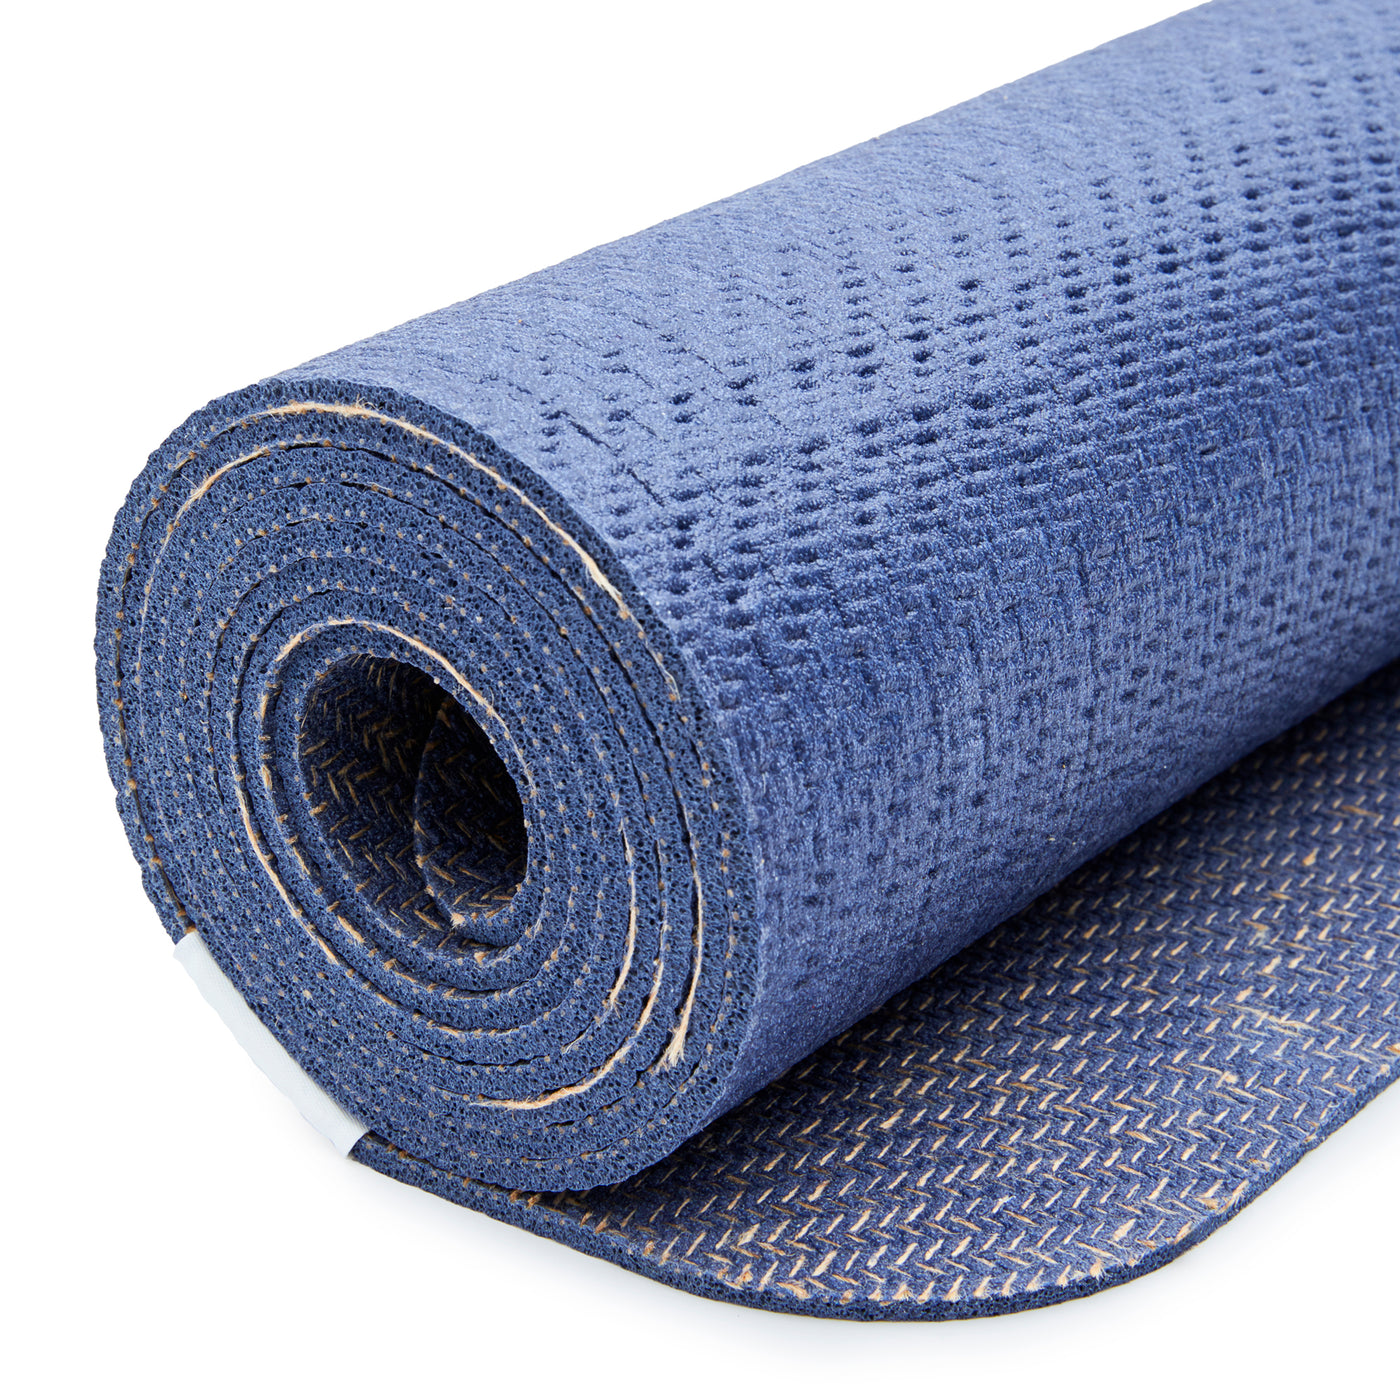 8 great eco-friendly yoga mats to support your practice and the